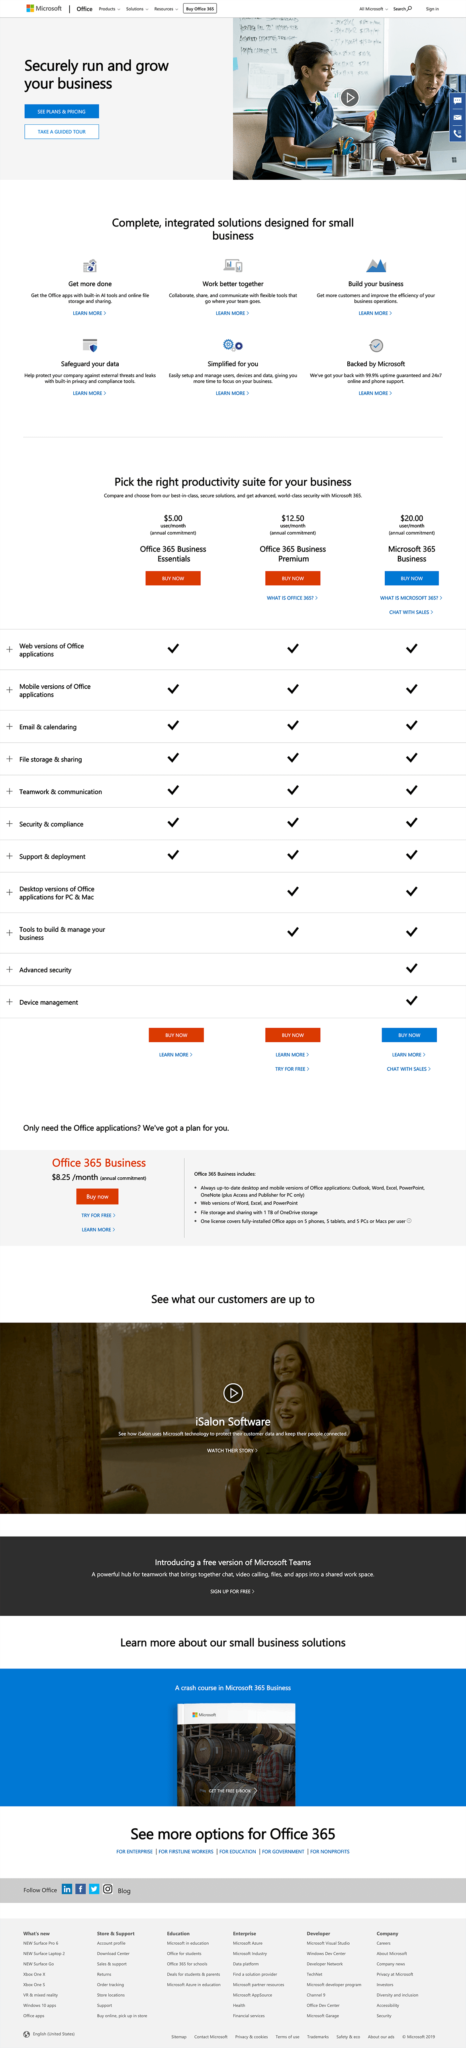 screencapture-products-office-en-us-business-small-business-solutions-2019-04-08-11_05_19 copy